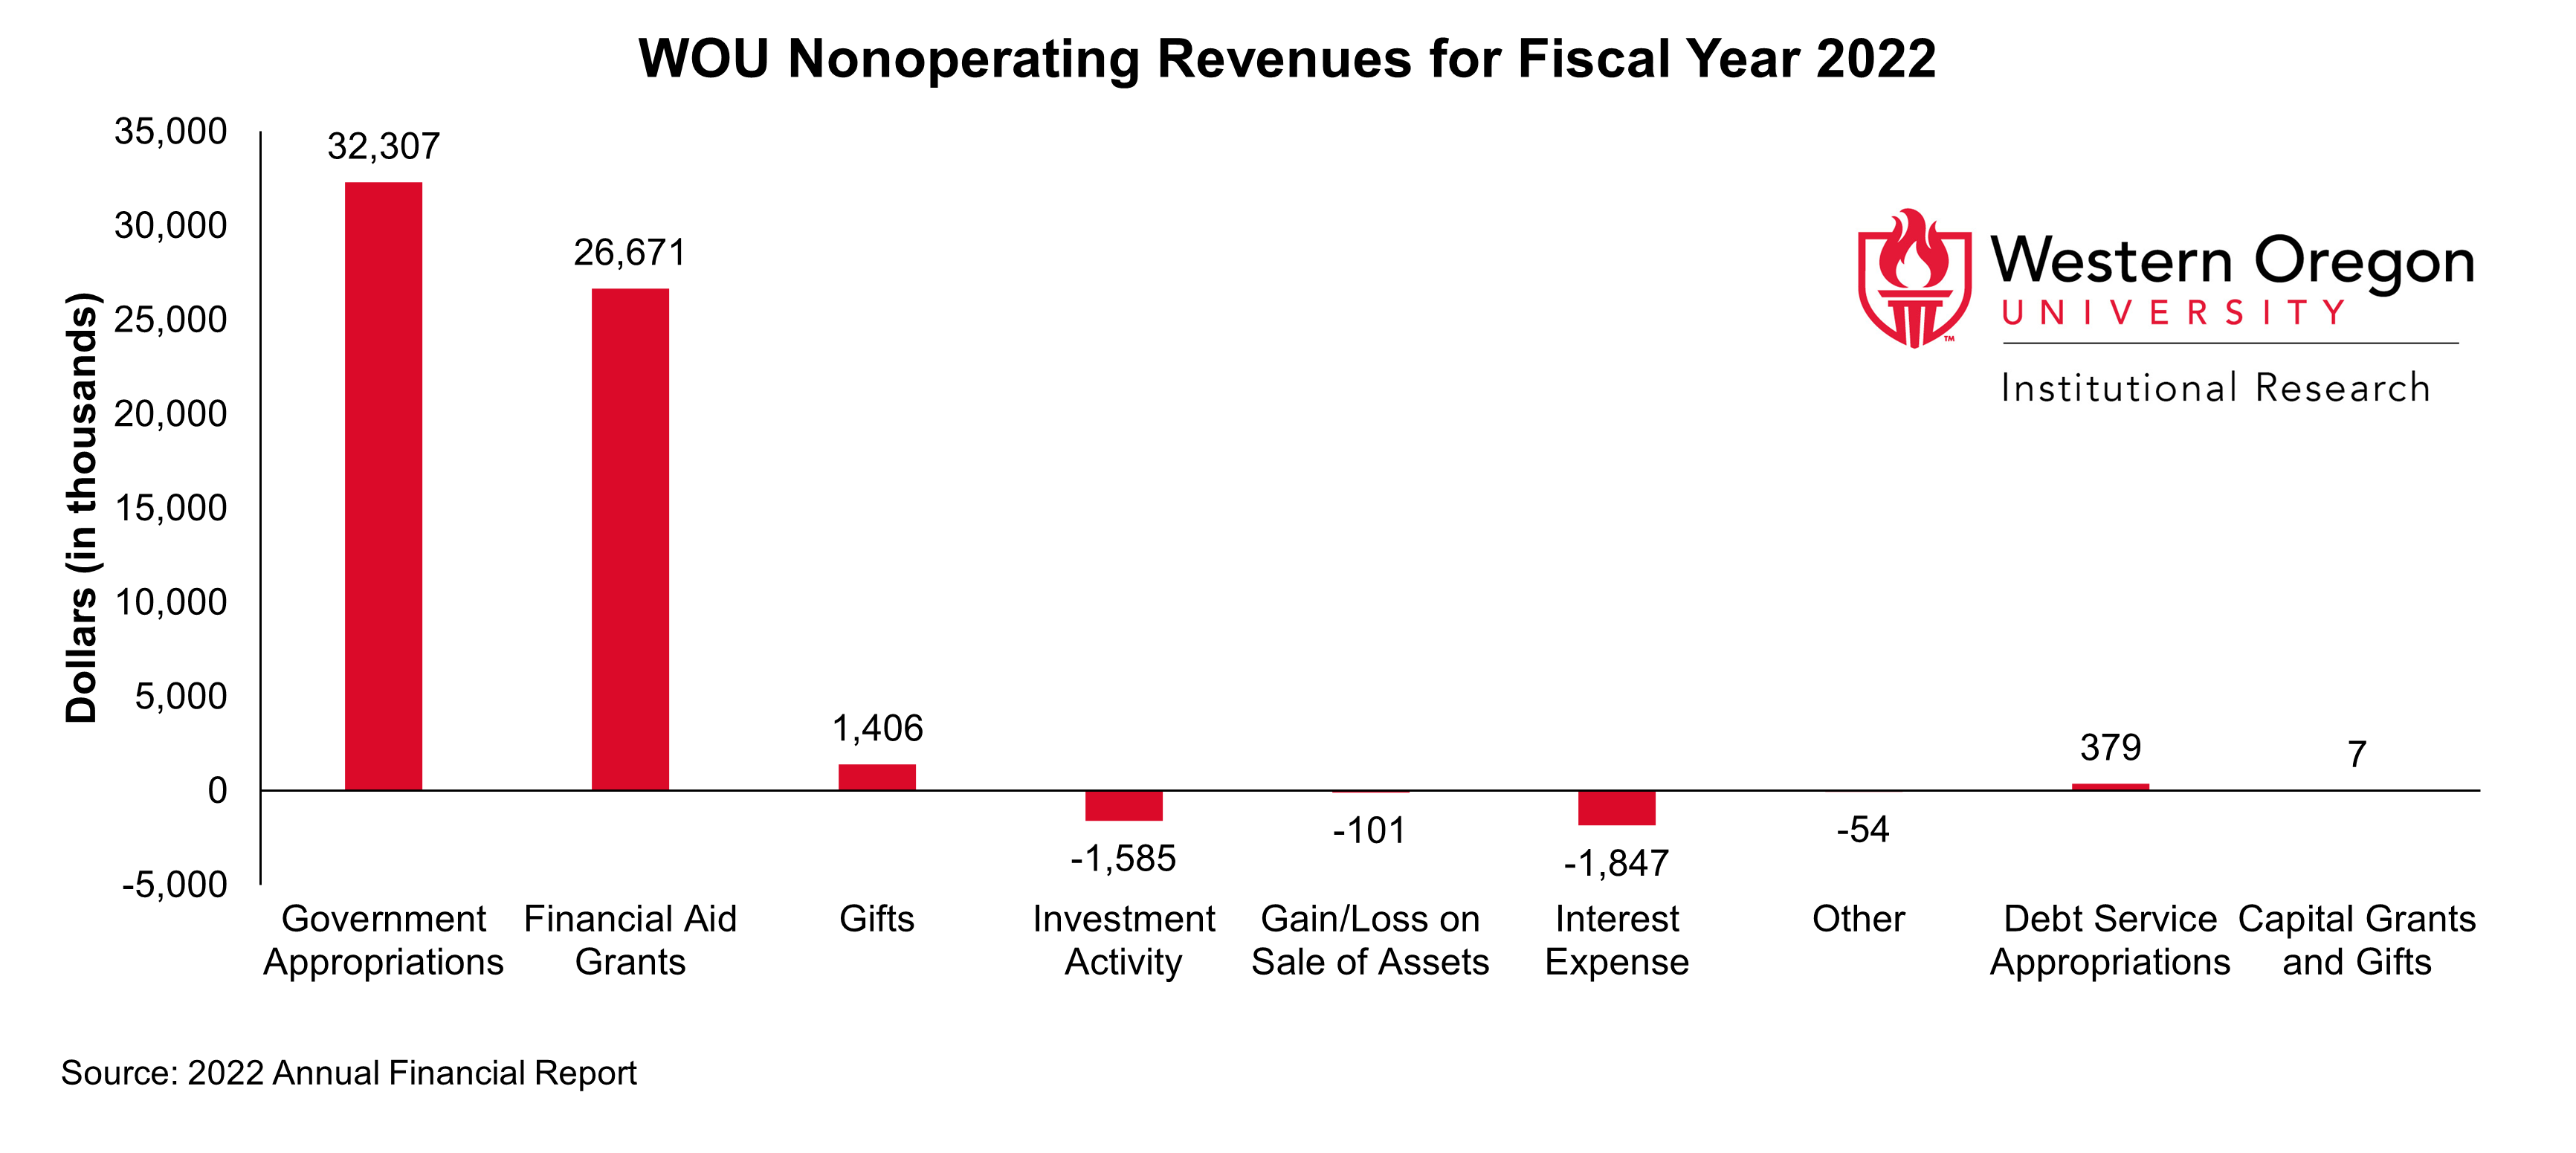 Bar graph of nonoperating revenues at WOU in 2022, broken out by revenue type, showing that government appropriations is the largest revenue type